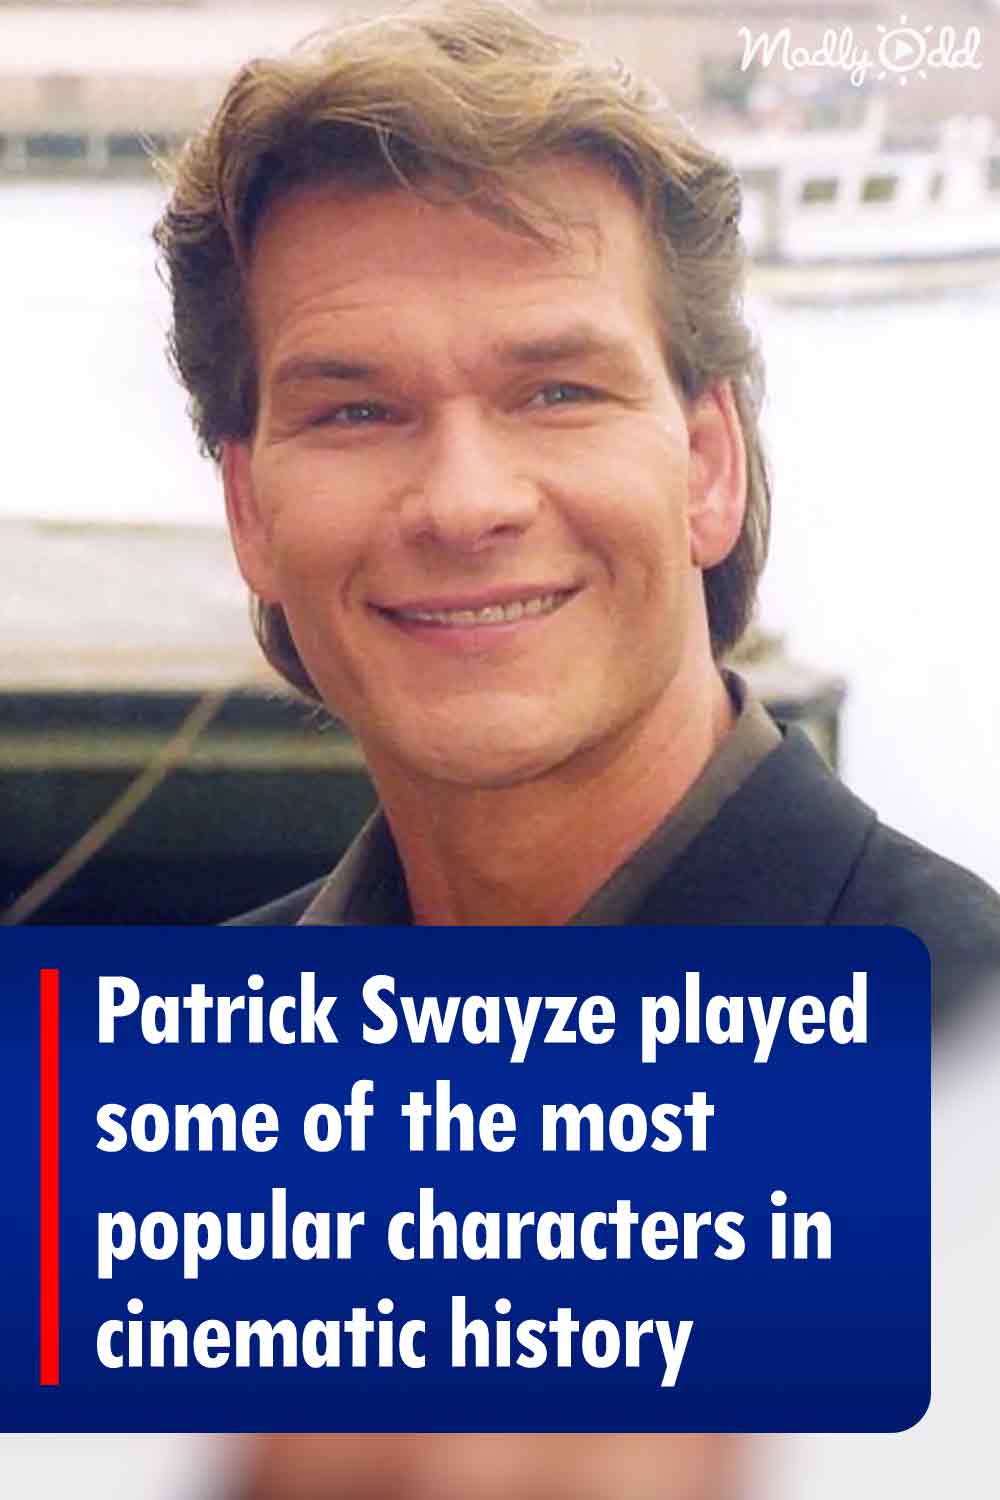 Patrick Swayze played some of the most popular characters in cinematic history